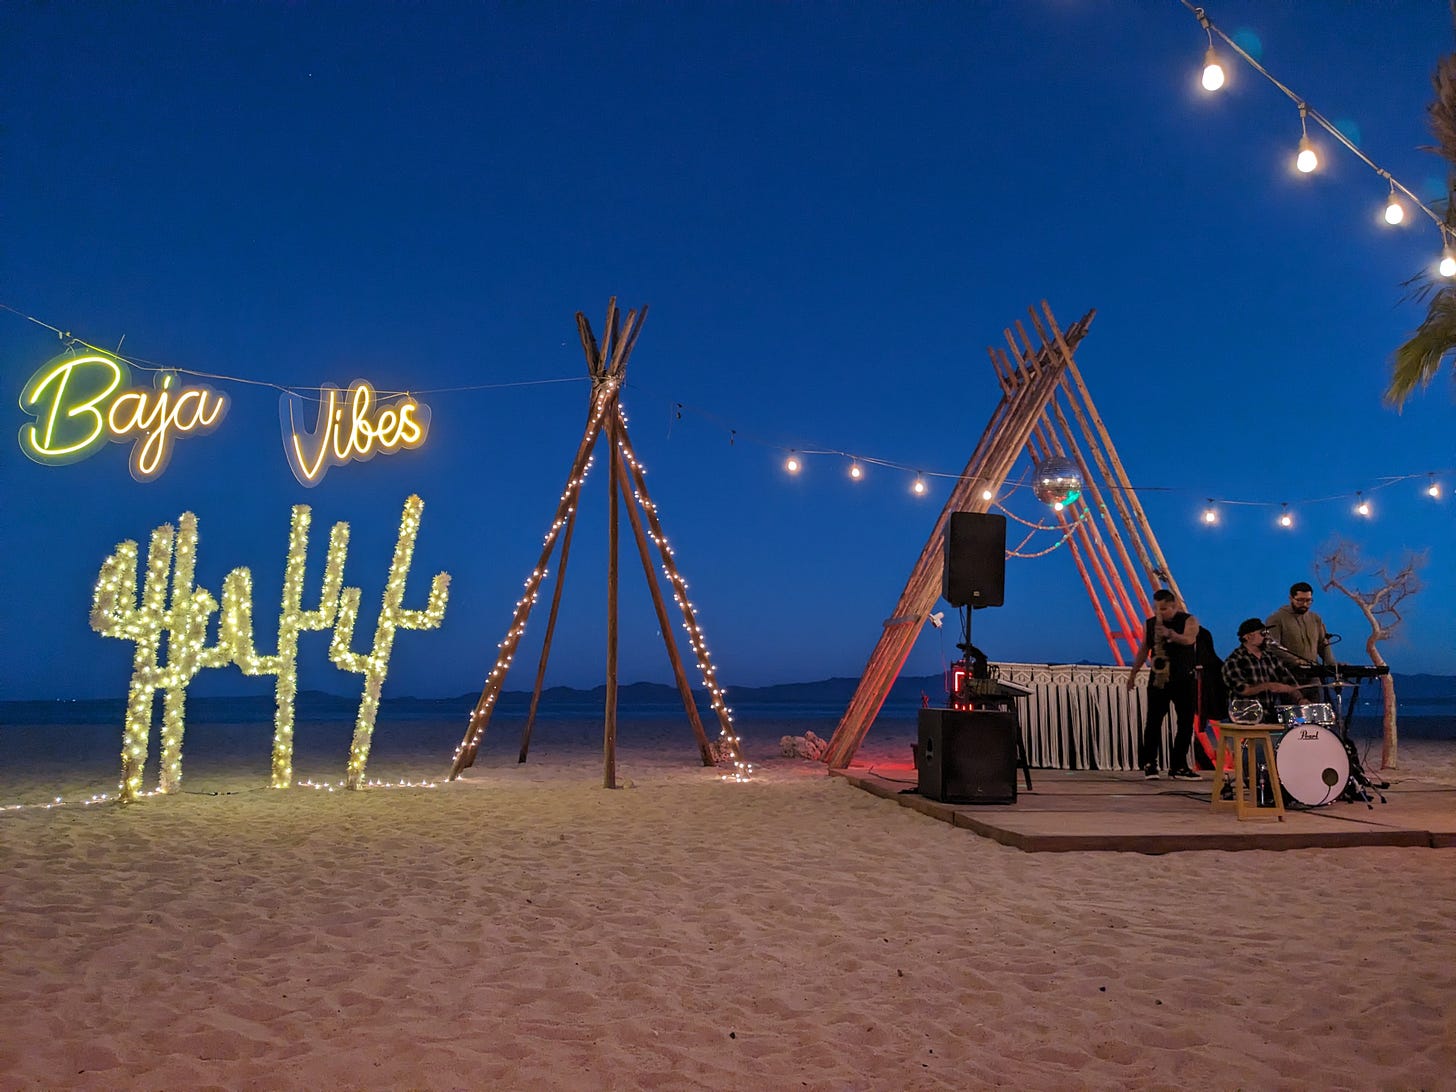 Structures set out on the beach: stage with small band, plastic cactus with twinkle lights, neon "Baja Vibes" sign